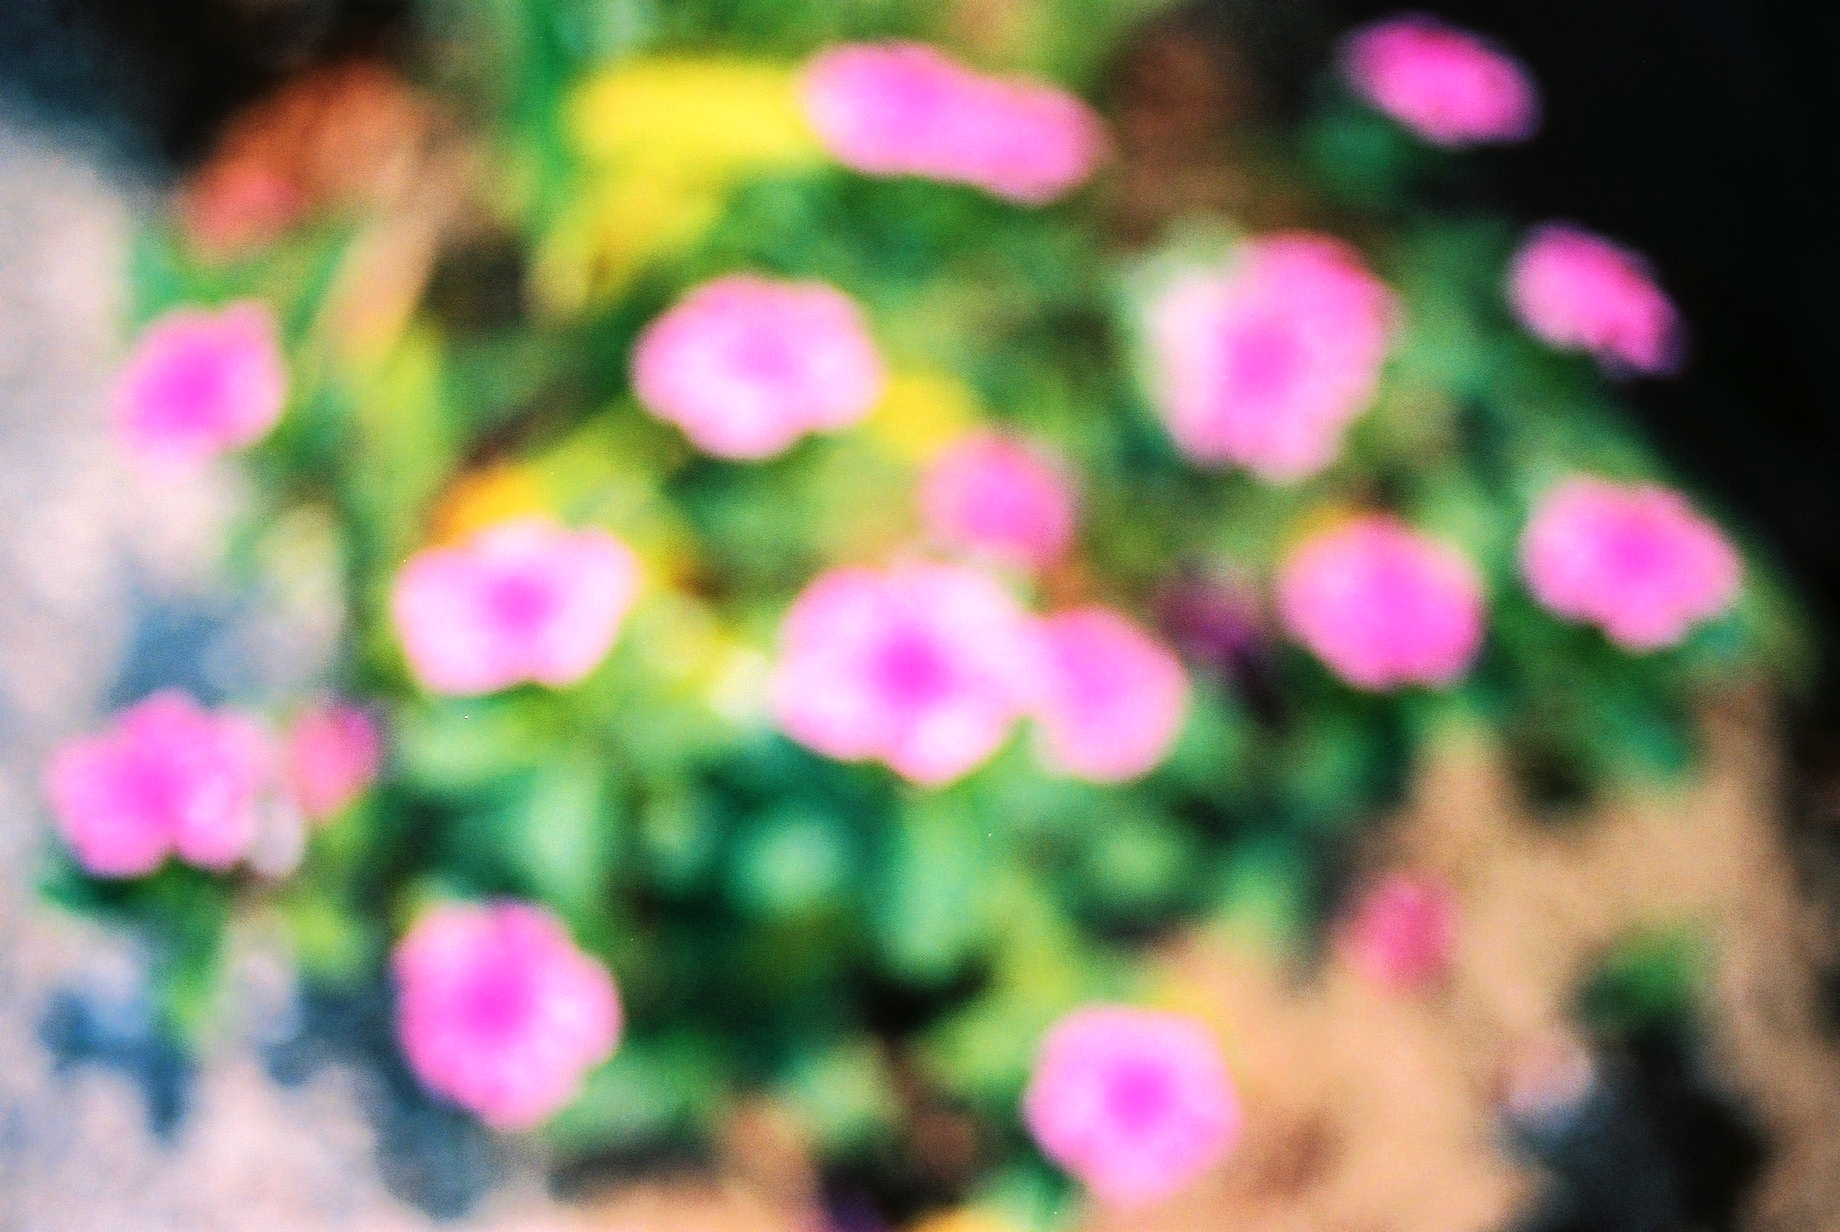 the blurred image shows pink flowers and green leaves